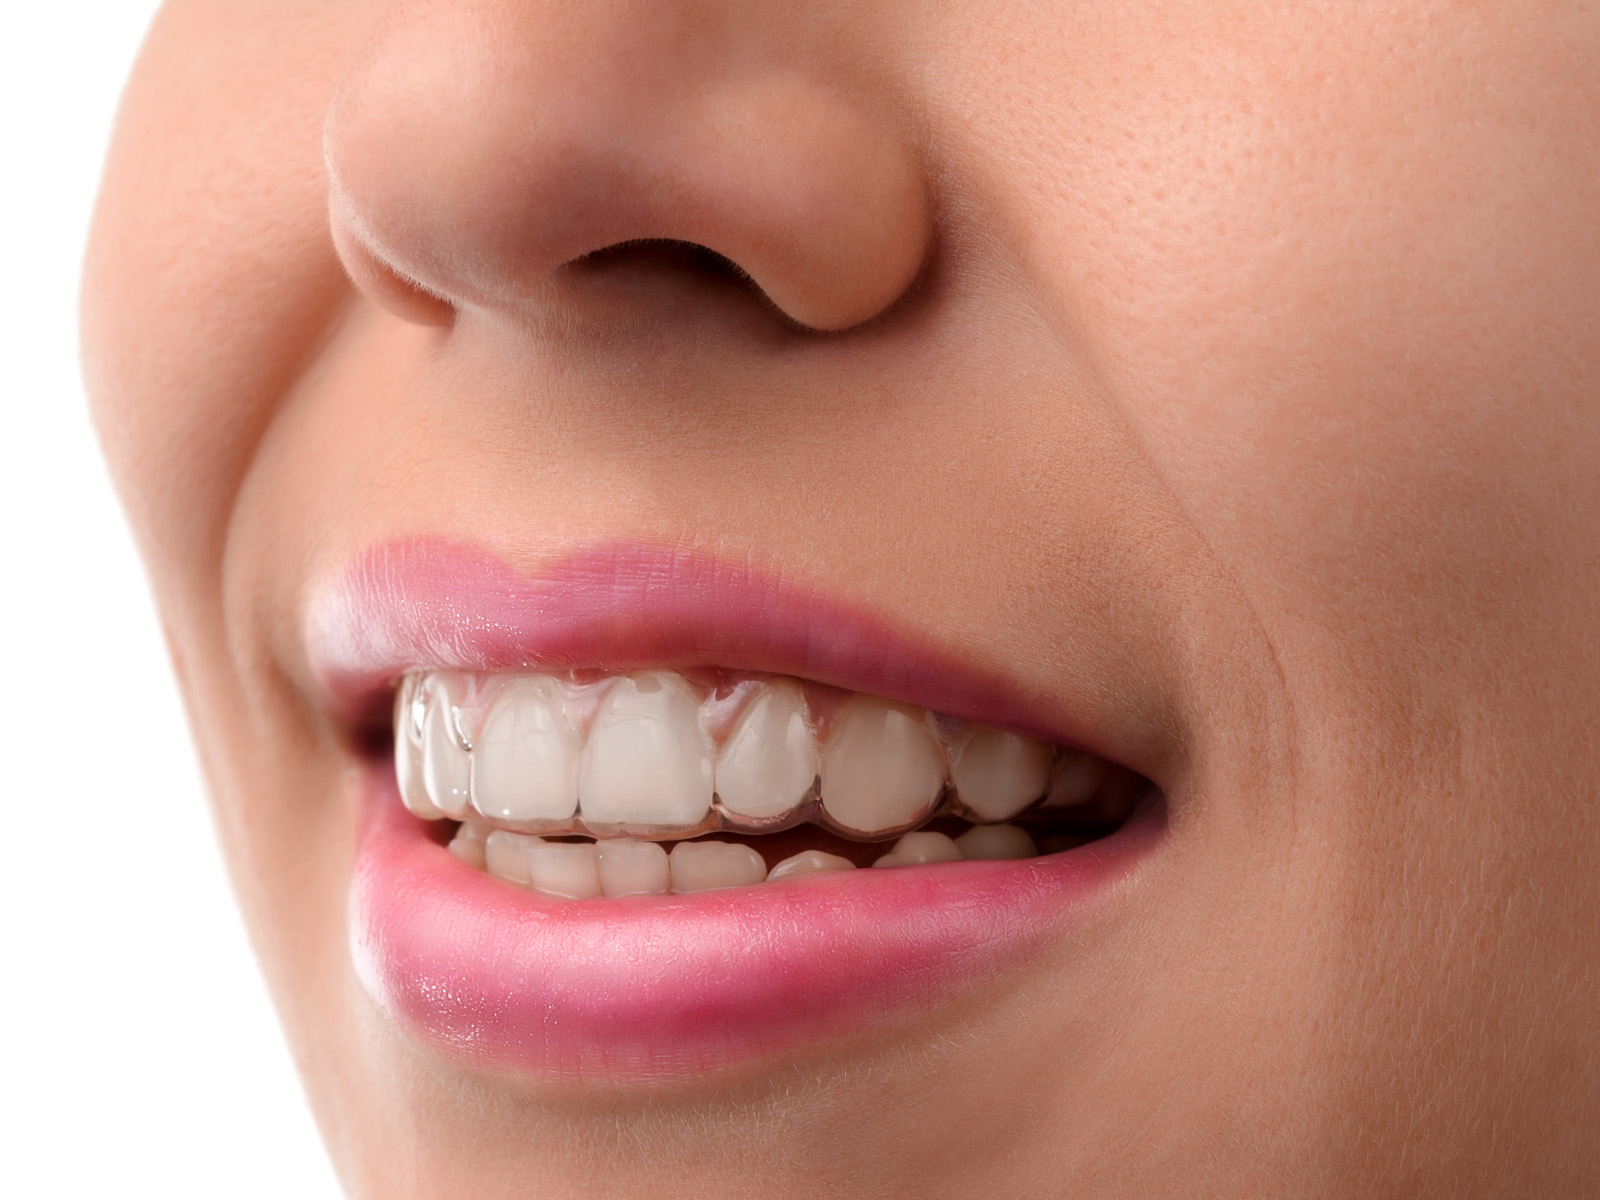 Does Invisalign make your teeth straight?